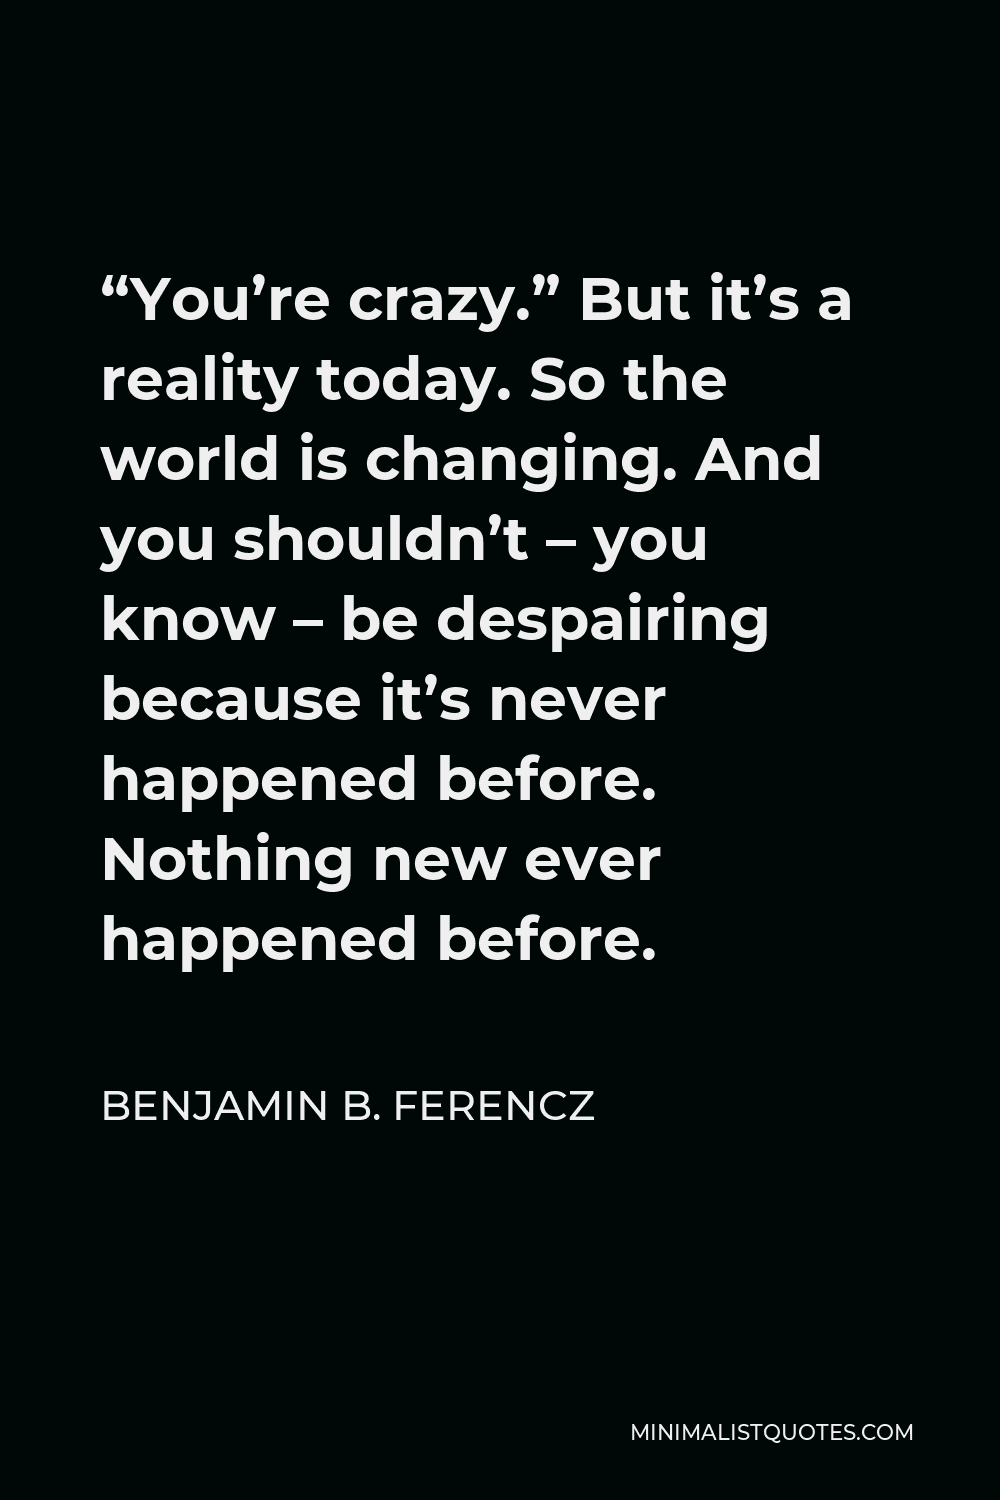 Benjamin B. Ferencz Quote - “You’re crazy.” But it’s a reality today. So the world is changing. And you shouldn’t – you know – be despairing because it’s never happened before. Nothing new ever happened before.